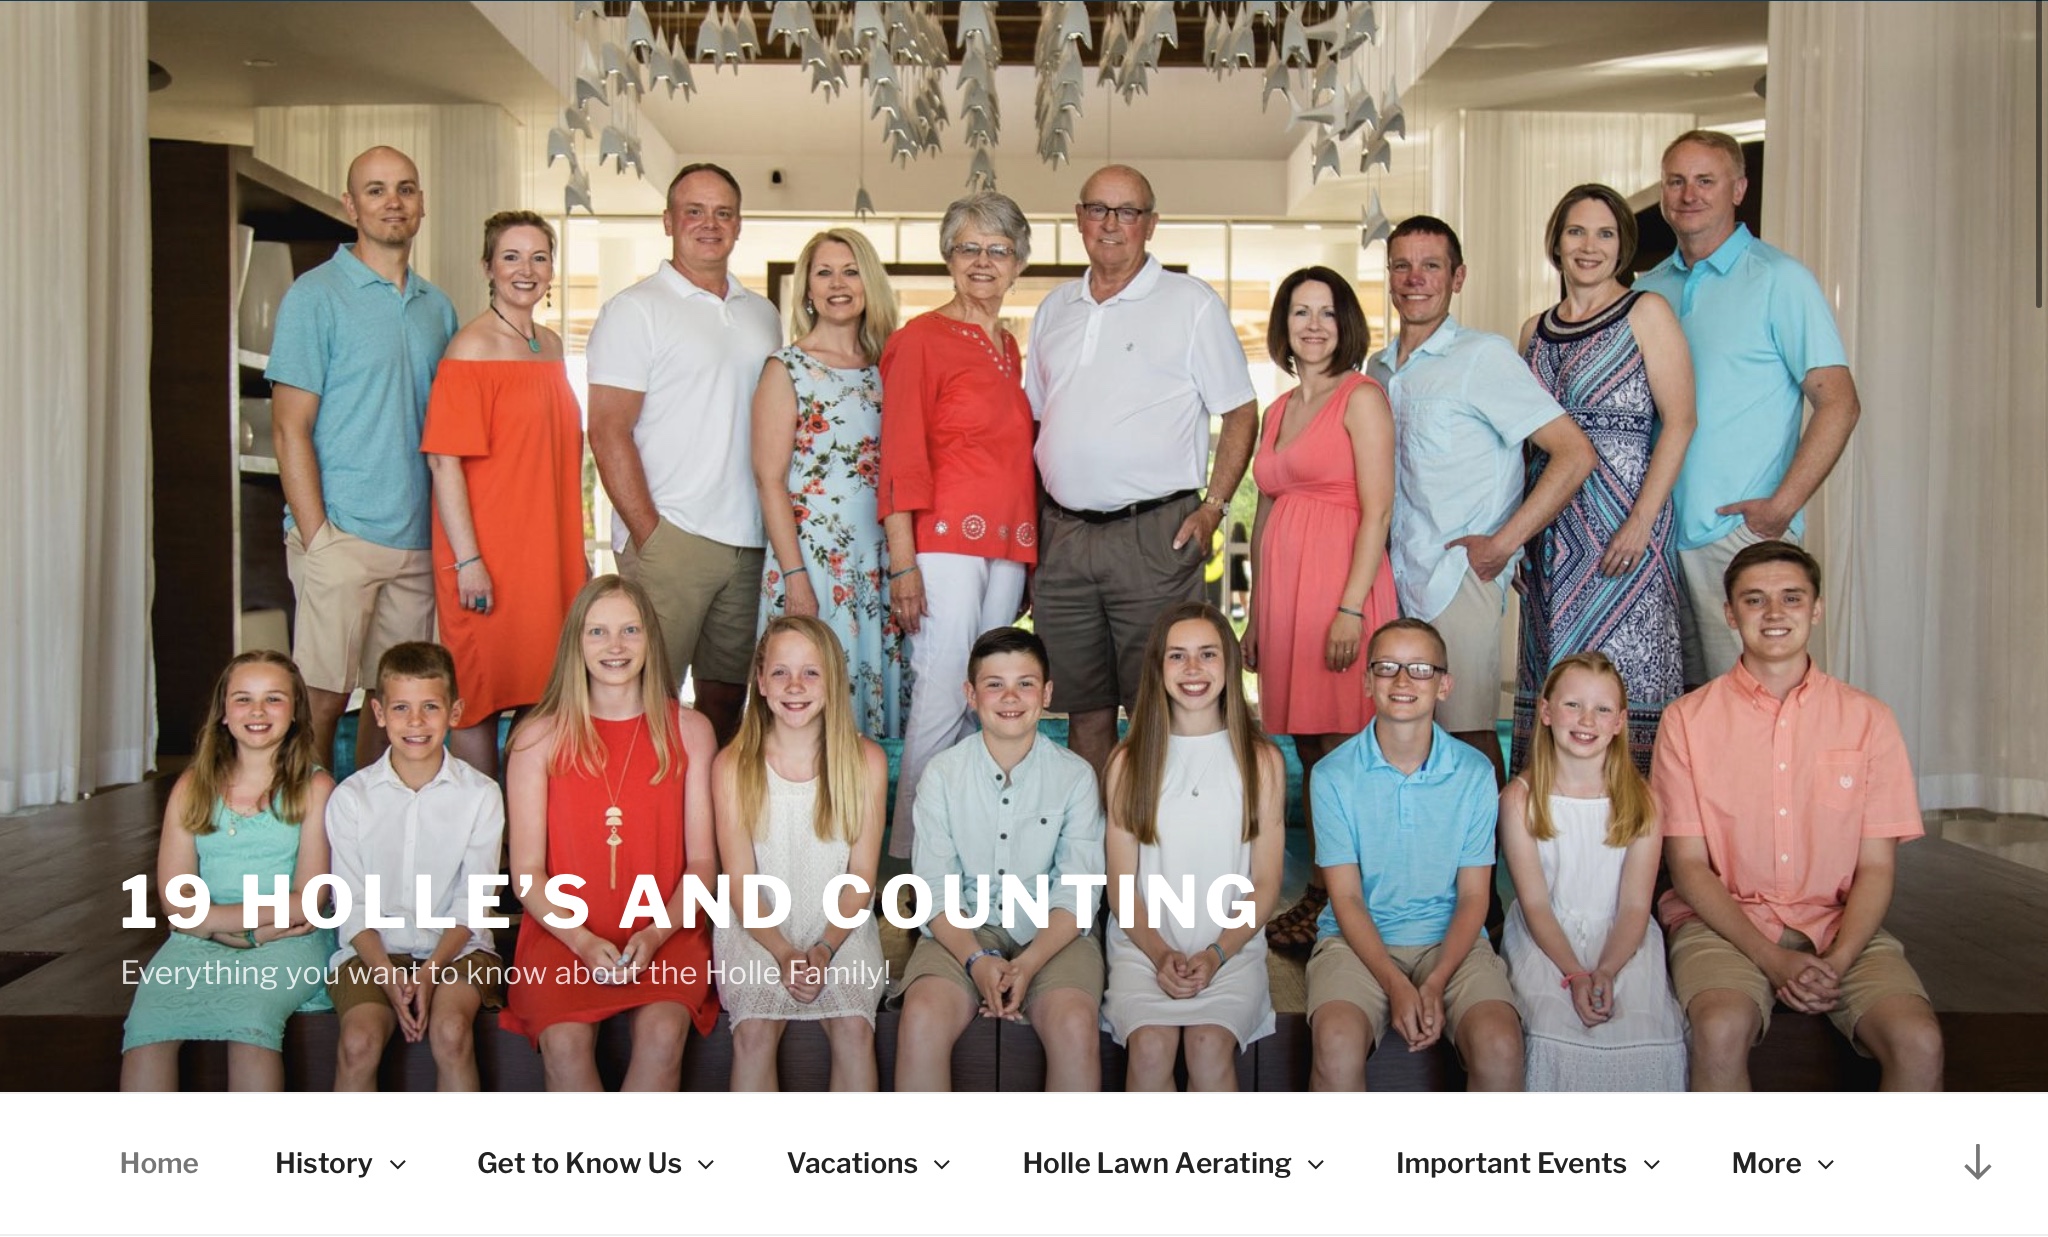 An screenshot of the homepage of my website all about the Holle family!